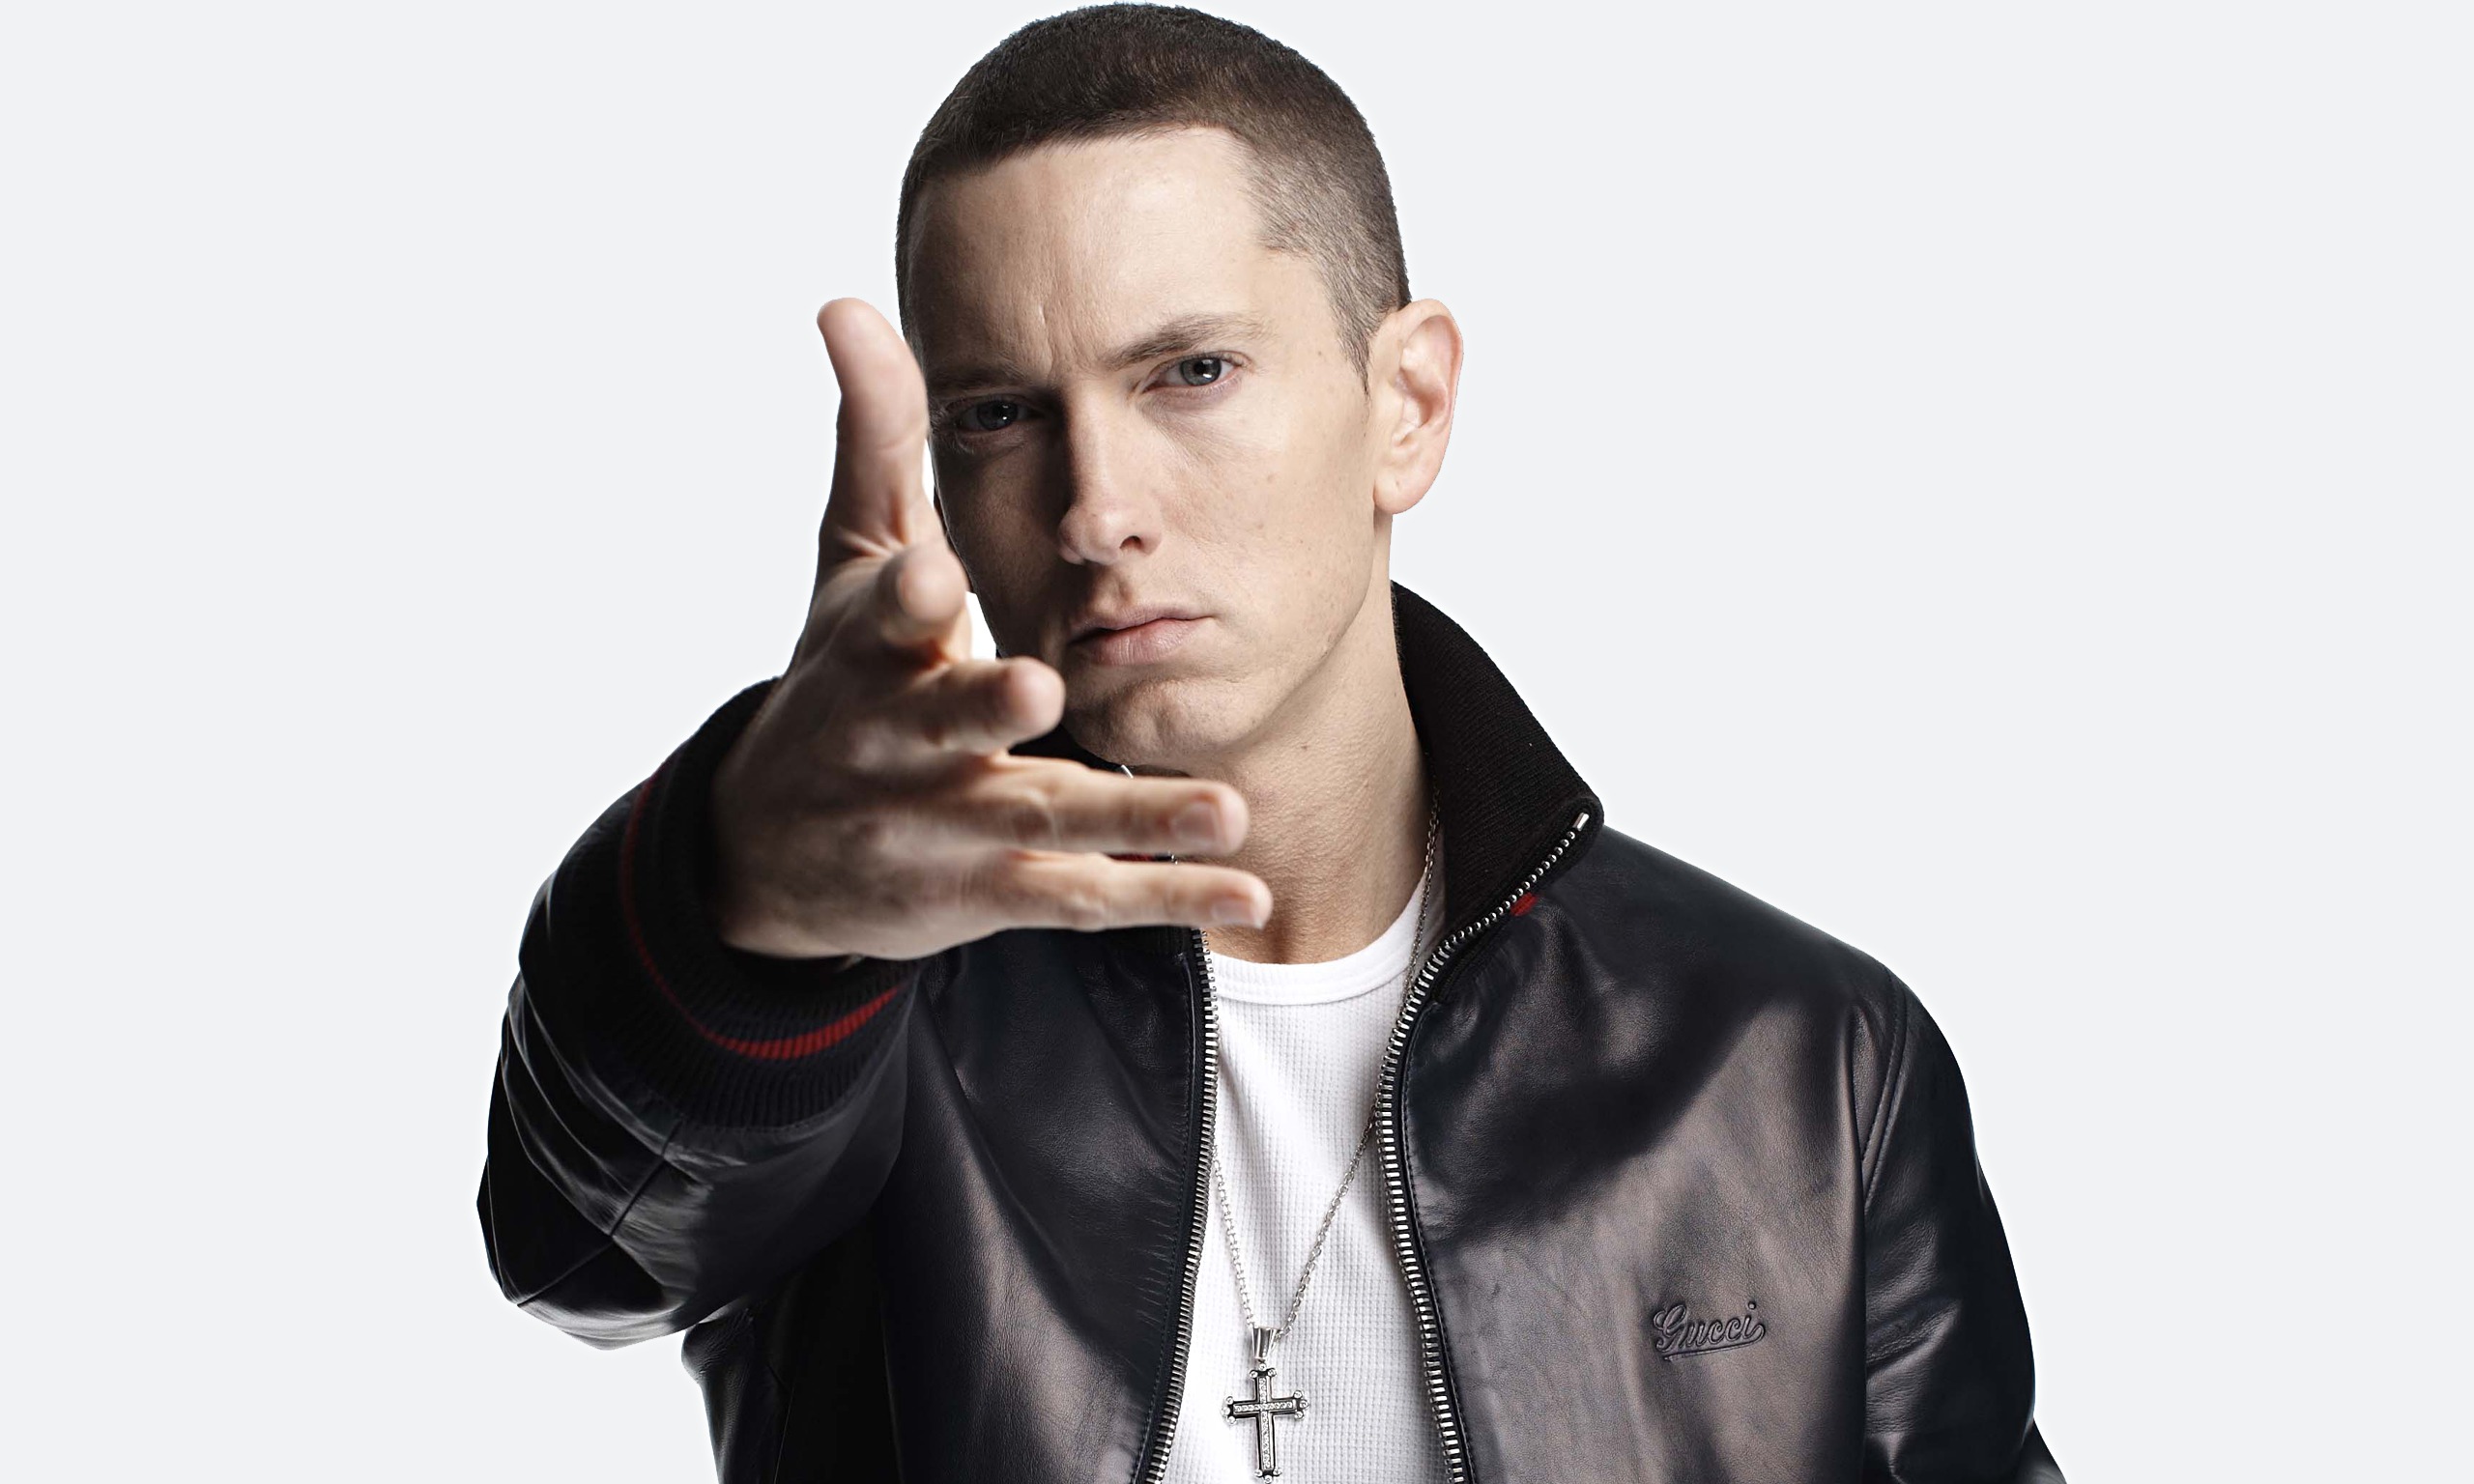 http://static.guim.co.uk/sys-images/Guardian/Pix/pictures/2014/7/4/1404470472617/Eminem-014.jpg